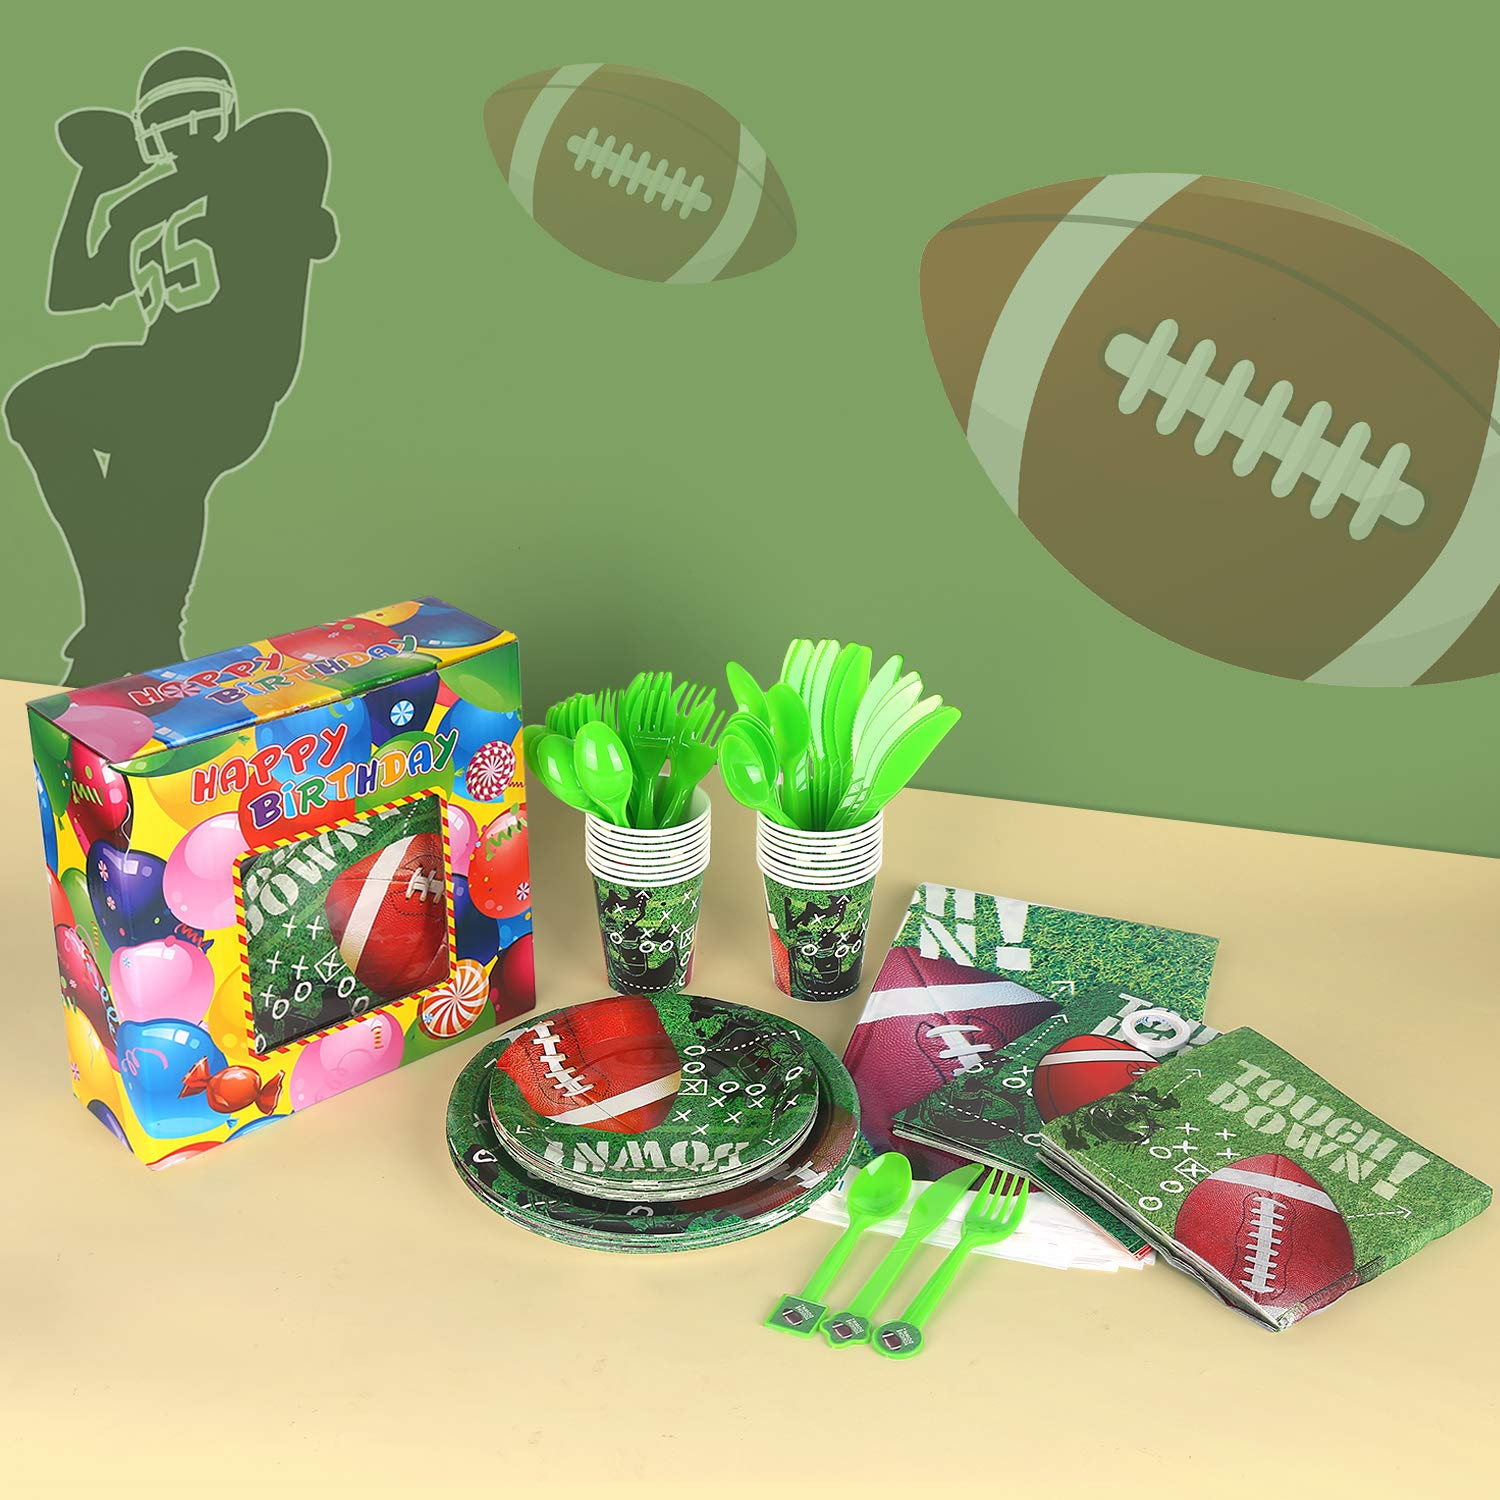 Football Party Supplies Set for 16 Guests, Includes Happy Birthday Banner, Balloons, Plates, Napkins, Spoons, Cups, Tablecloth for Kids Birthday Party Decorations